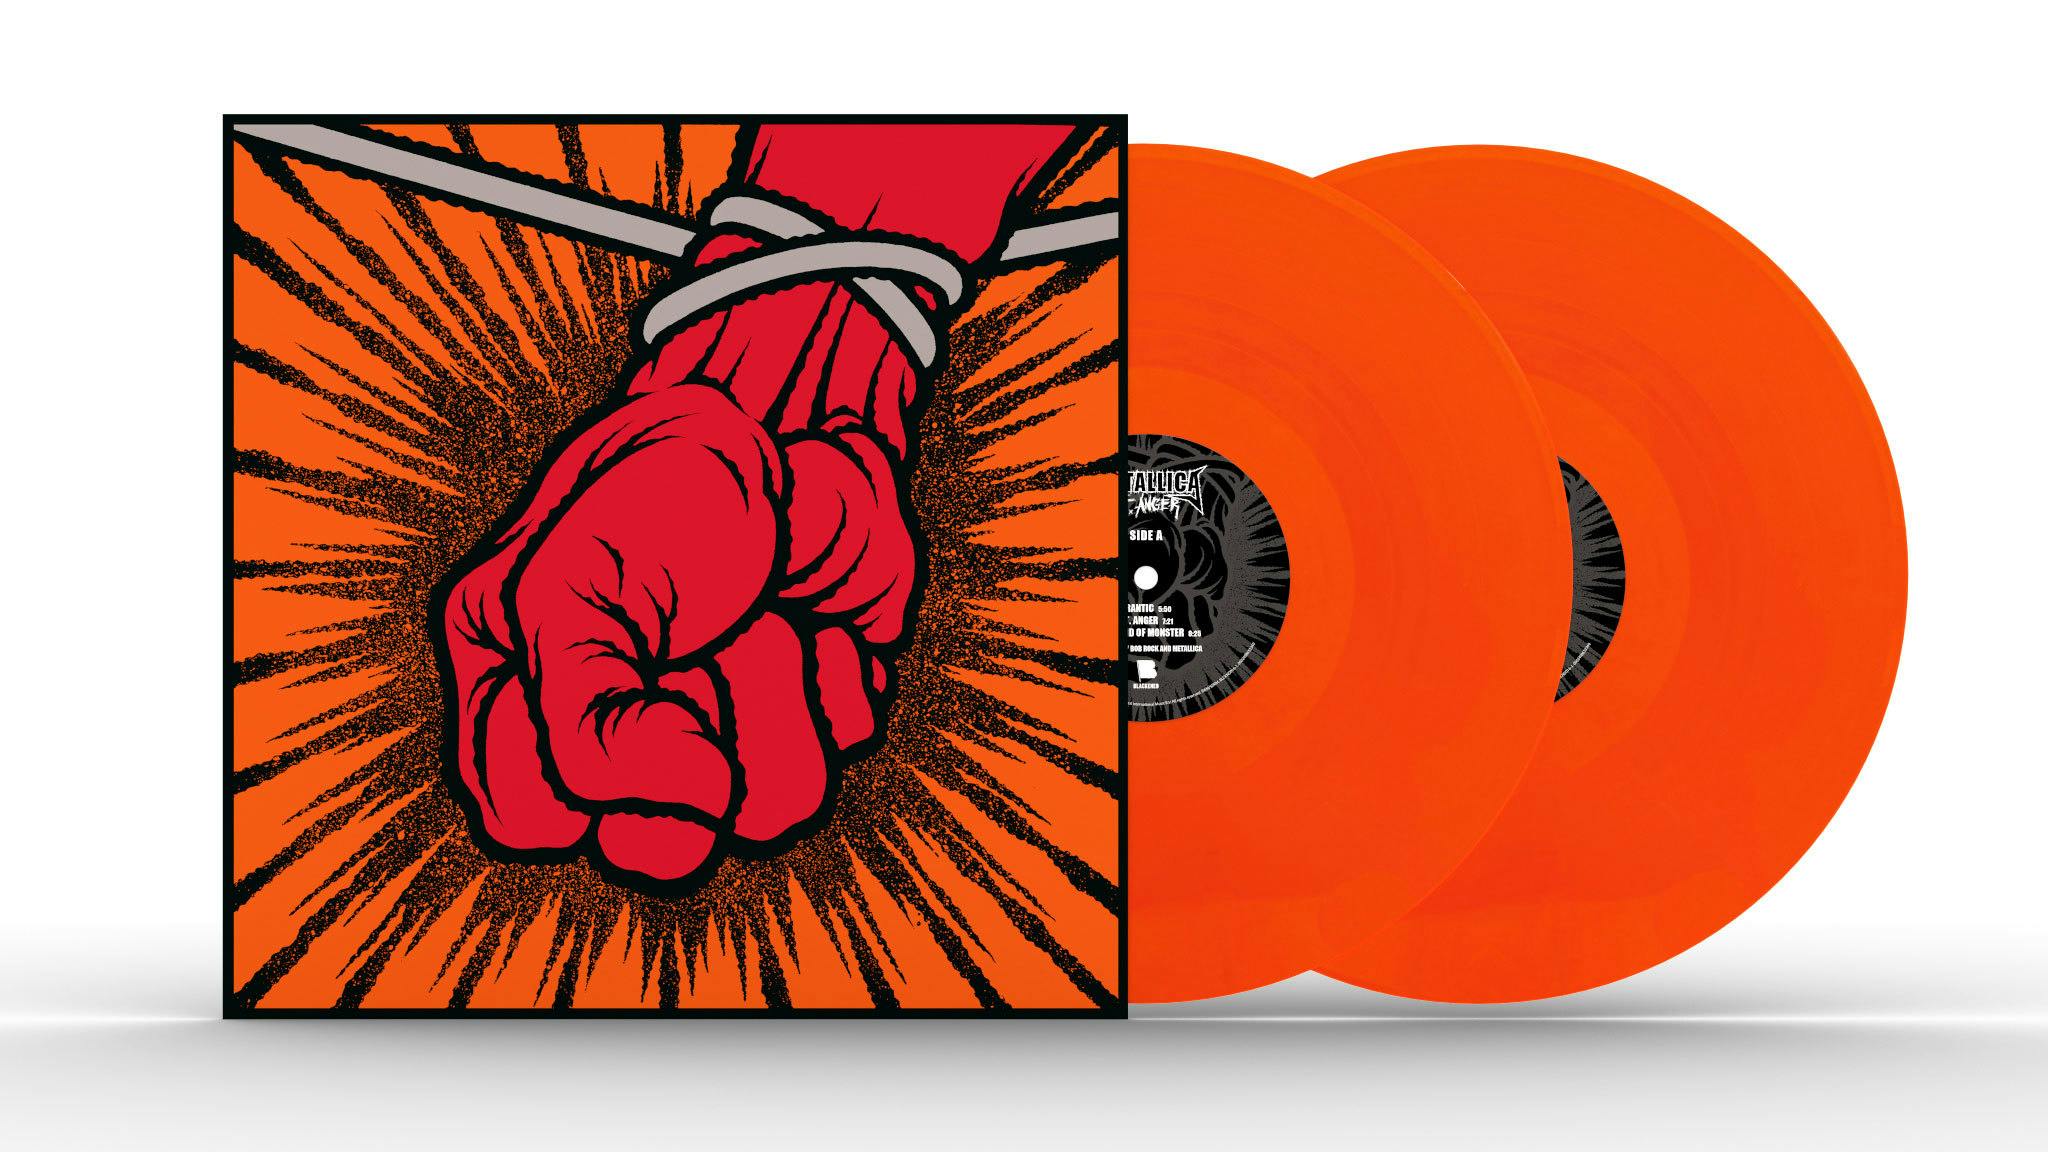 Metallica announce new vinyl pressings of St. Anger, Garage, Inc. and more